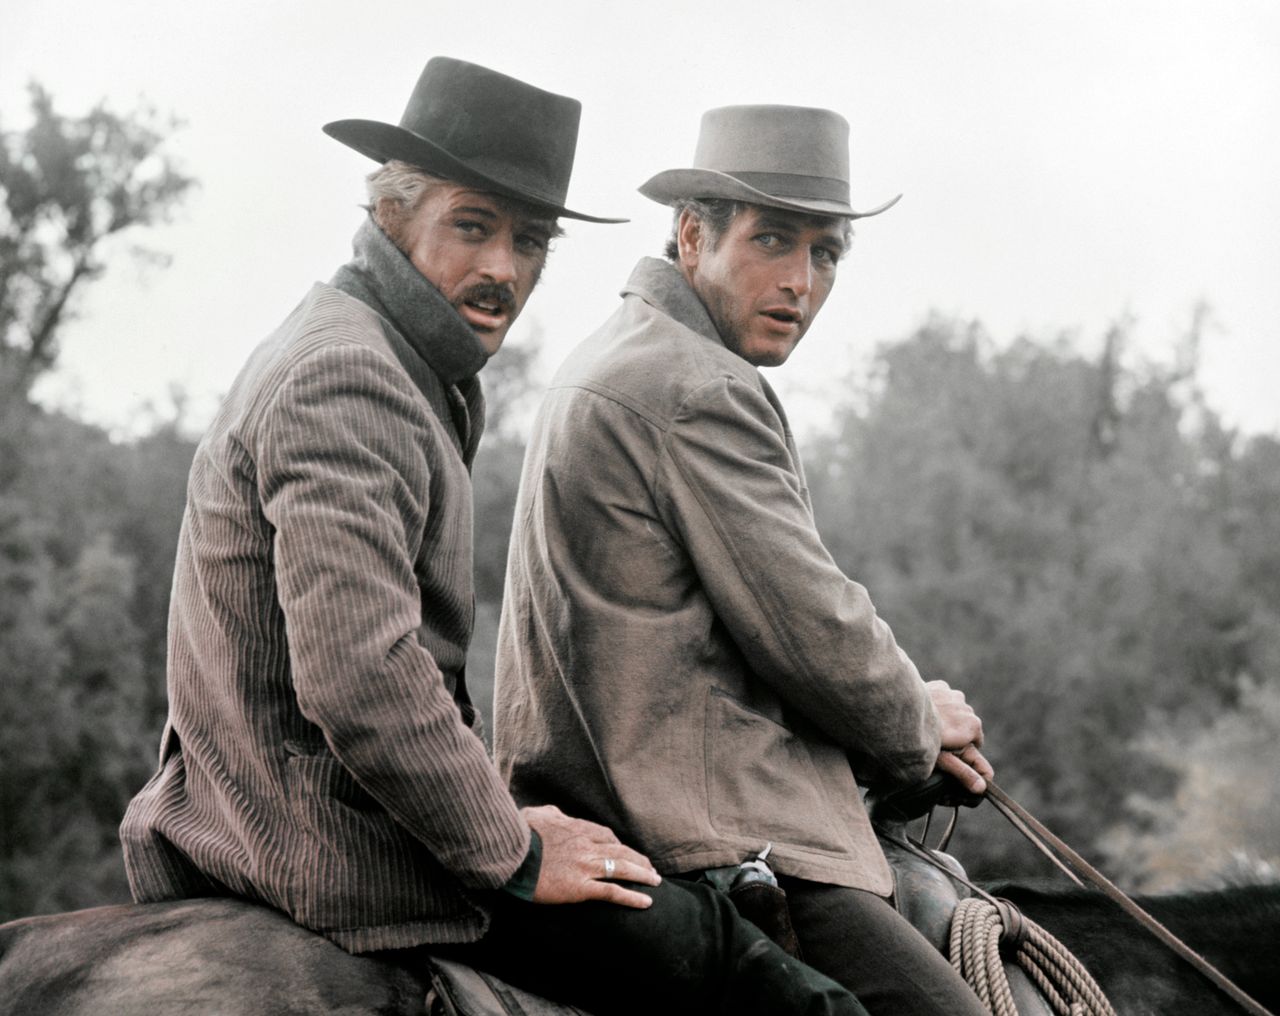 Robert Redford and Paul Newman in "Butch Cassidy and the Sundance Kid."